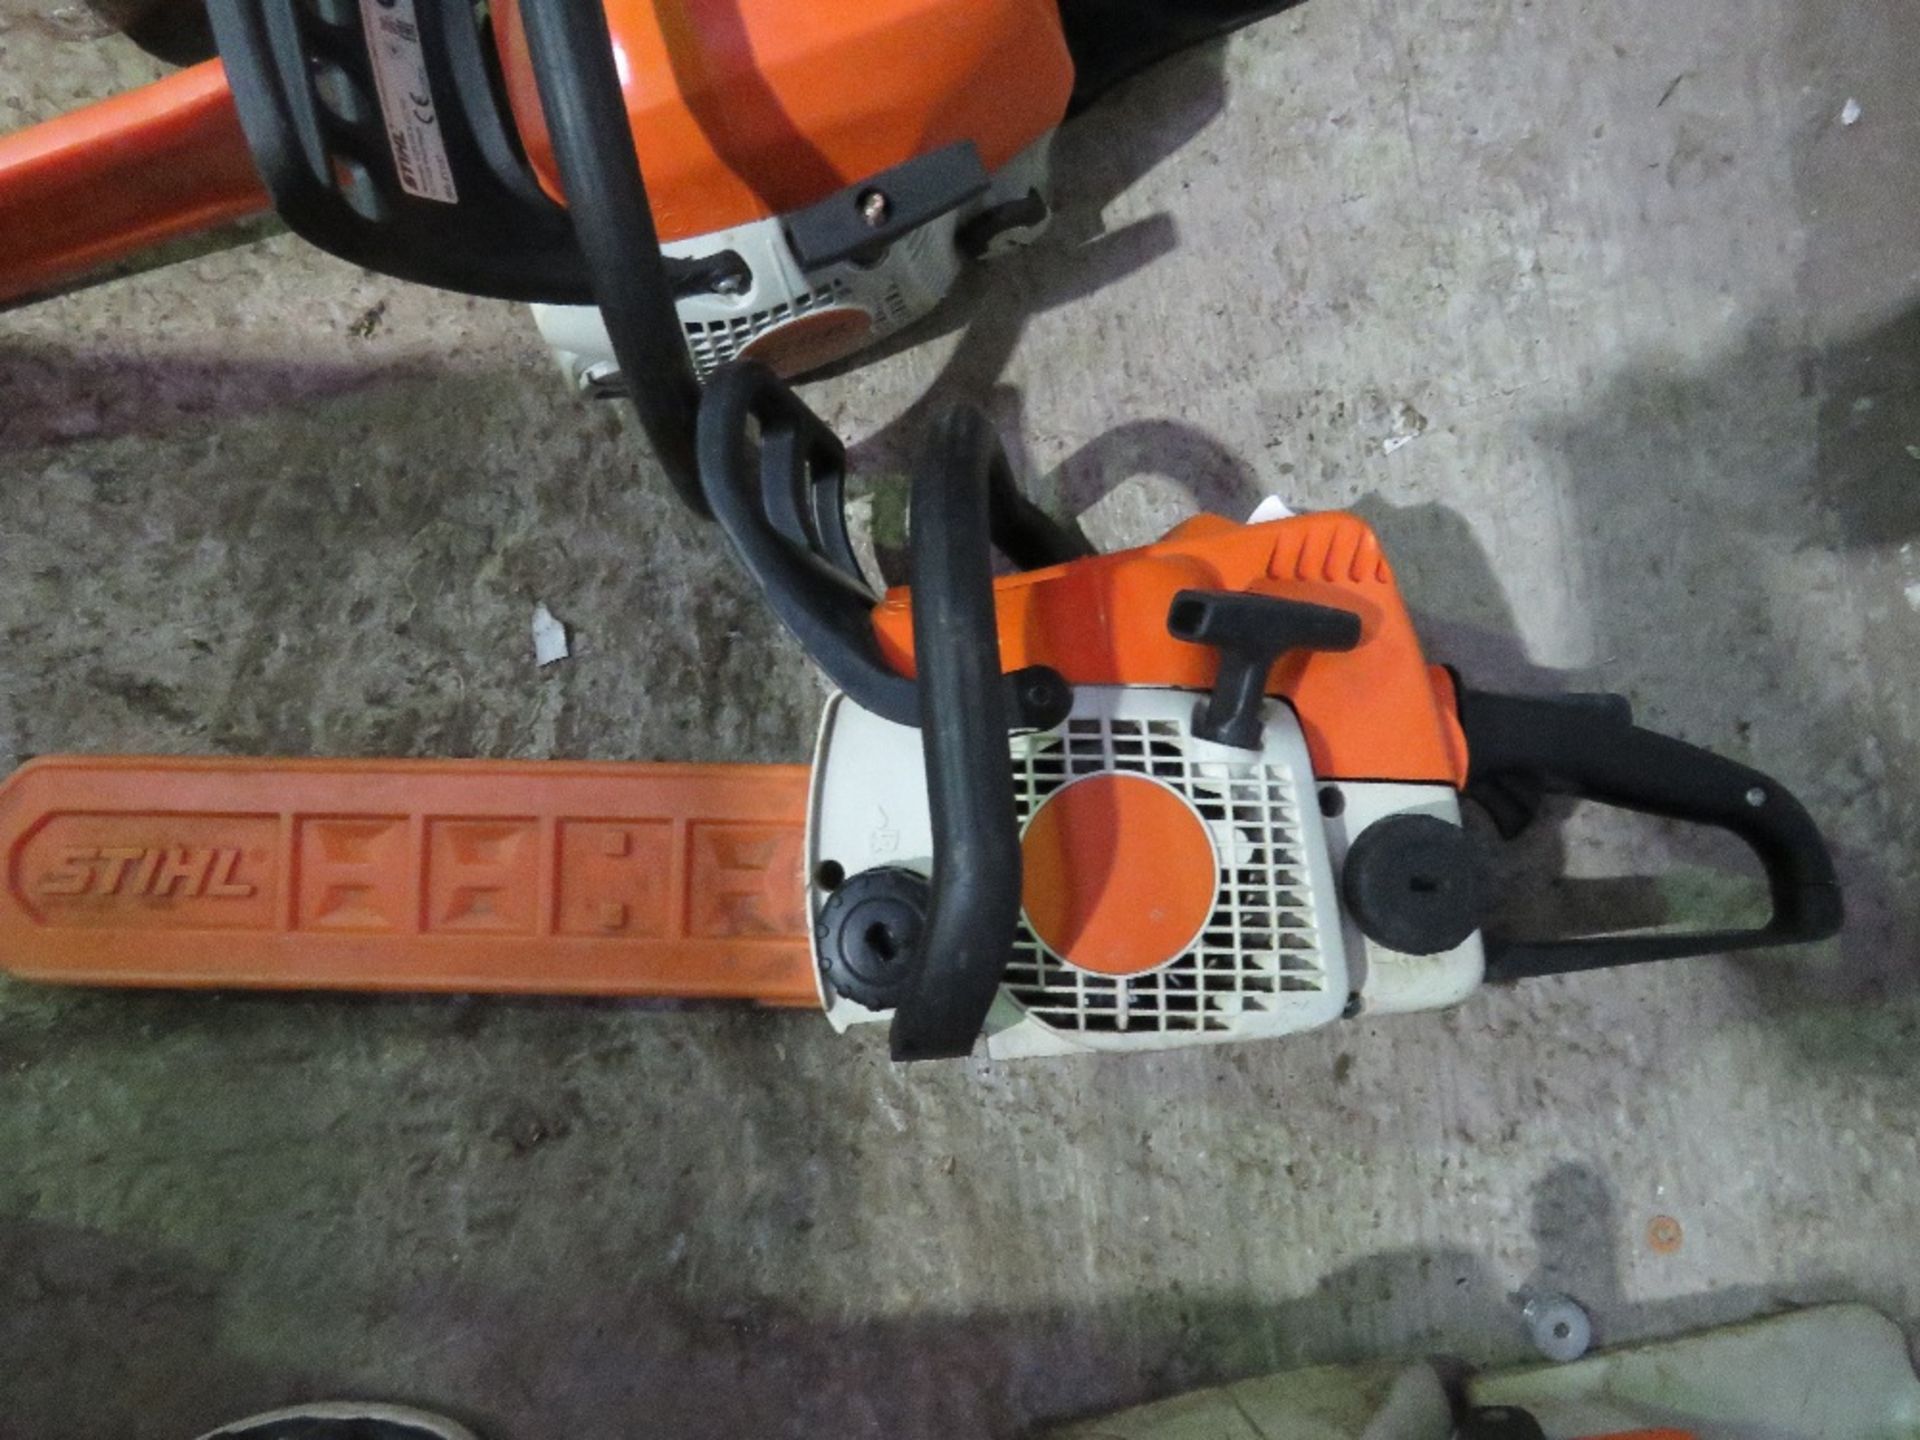 STIHL PETROL ENGINED CHAINSAW. THIS LOT IS SOLD UNDER THE AUCTIONEERS MARGIN SCHEME, THEREFORE N